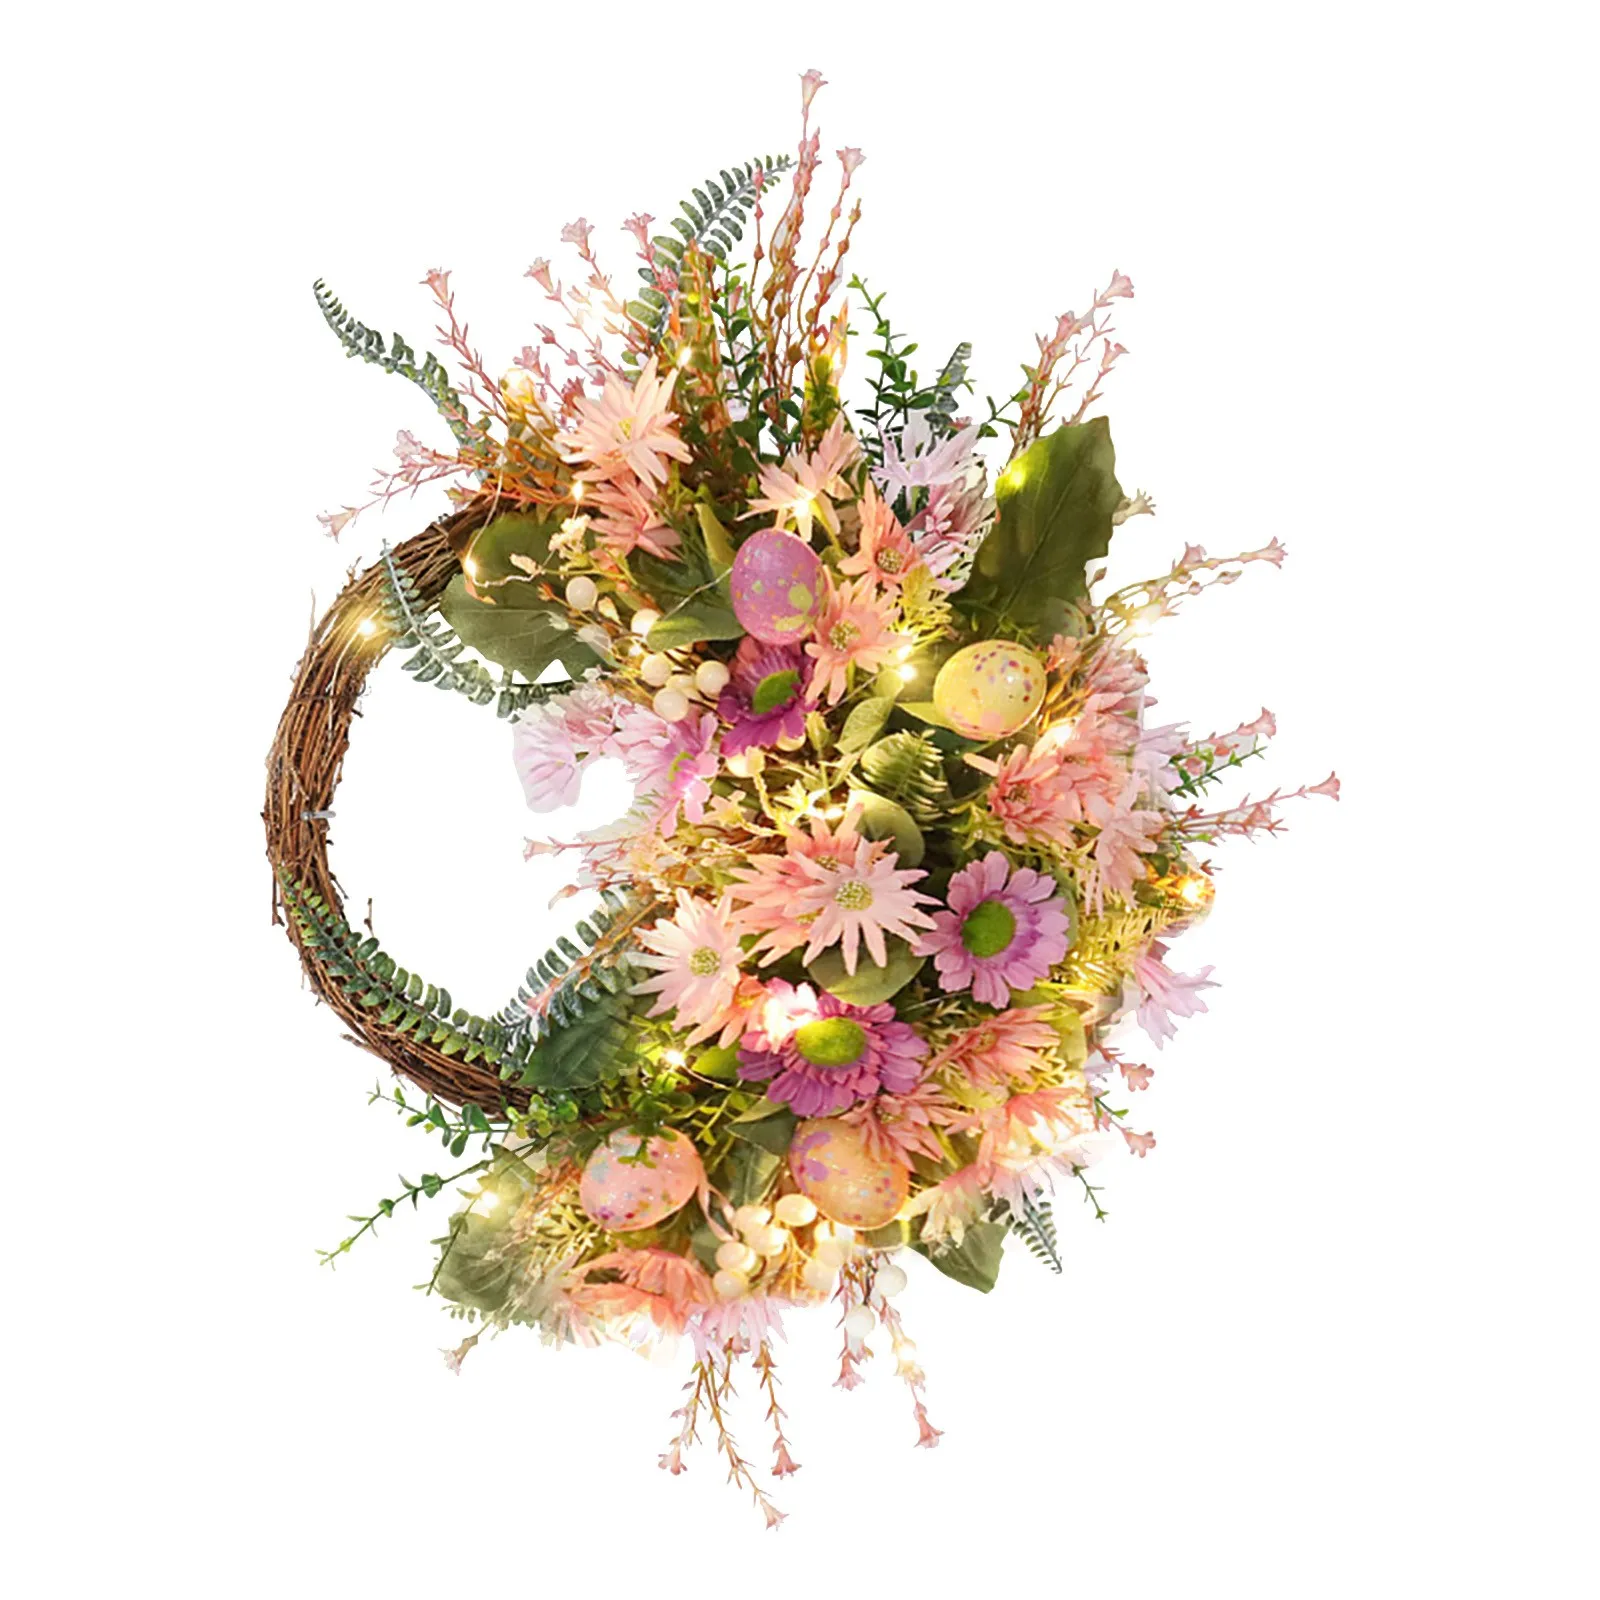 

Door Vines Dried And Easter Party Wreath Flowers Wall Decorative Decoration Spring/Summer Easy Bow for Pink for Front Door